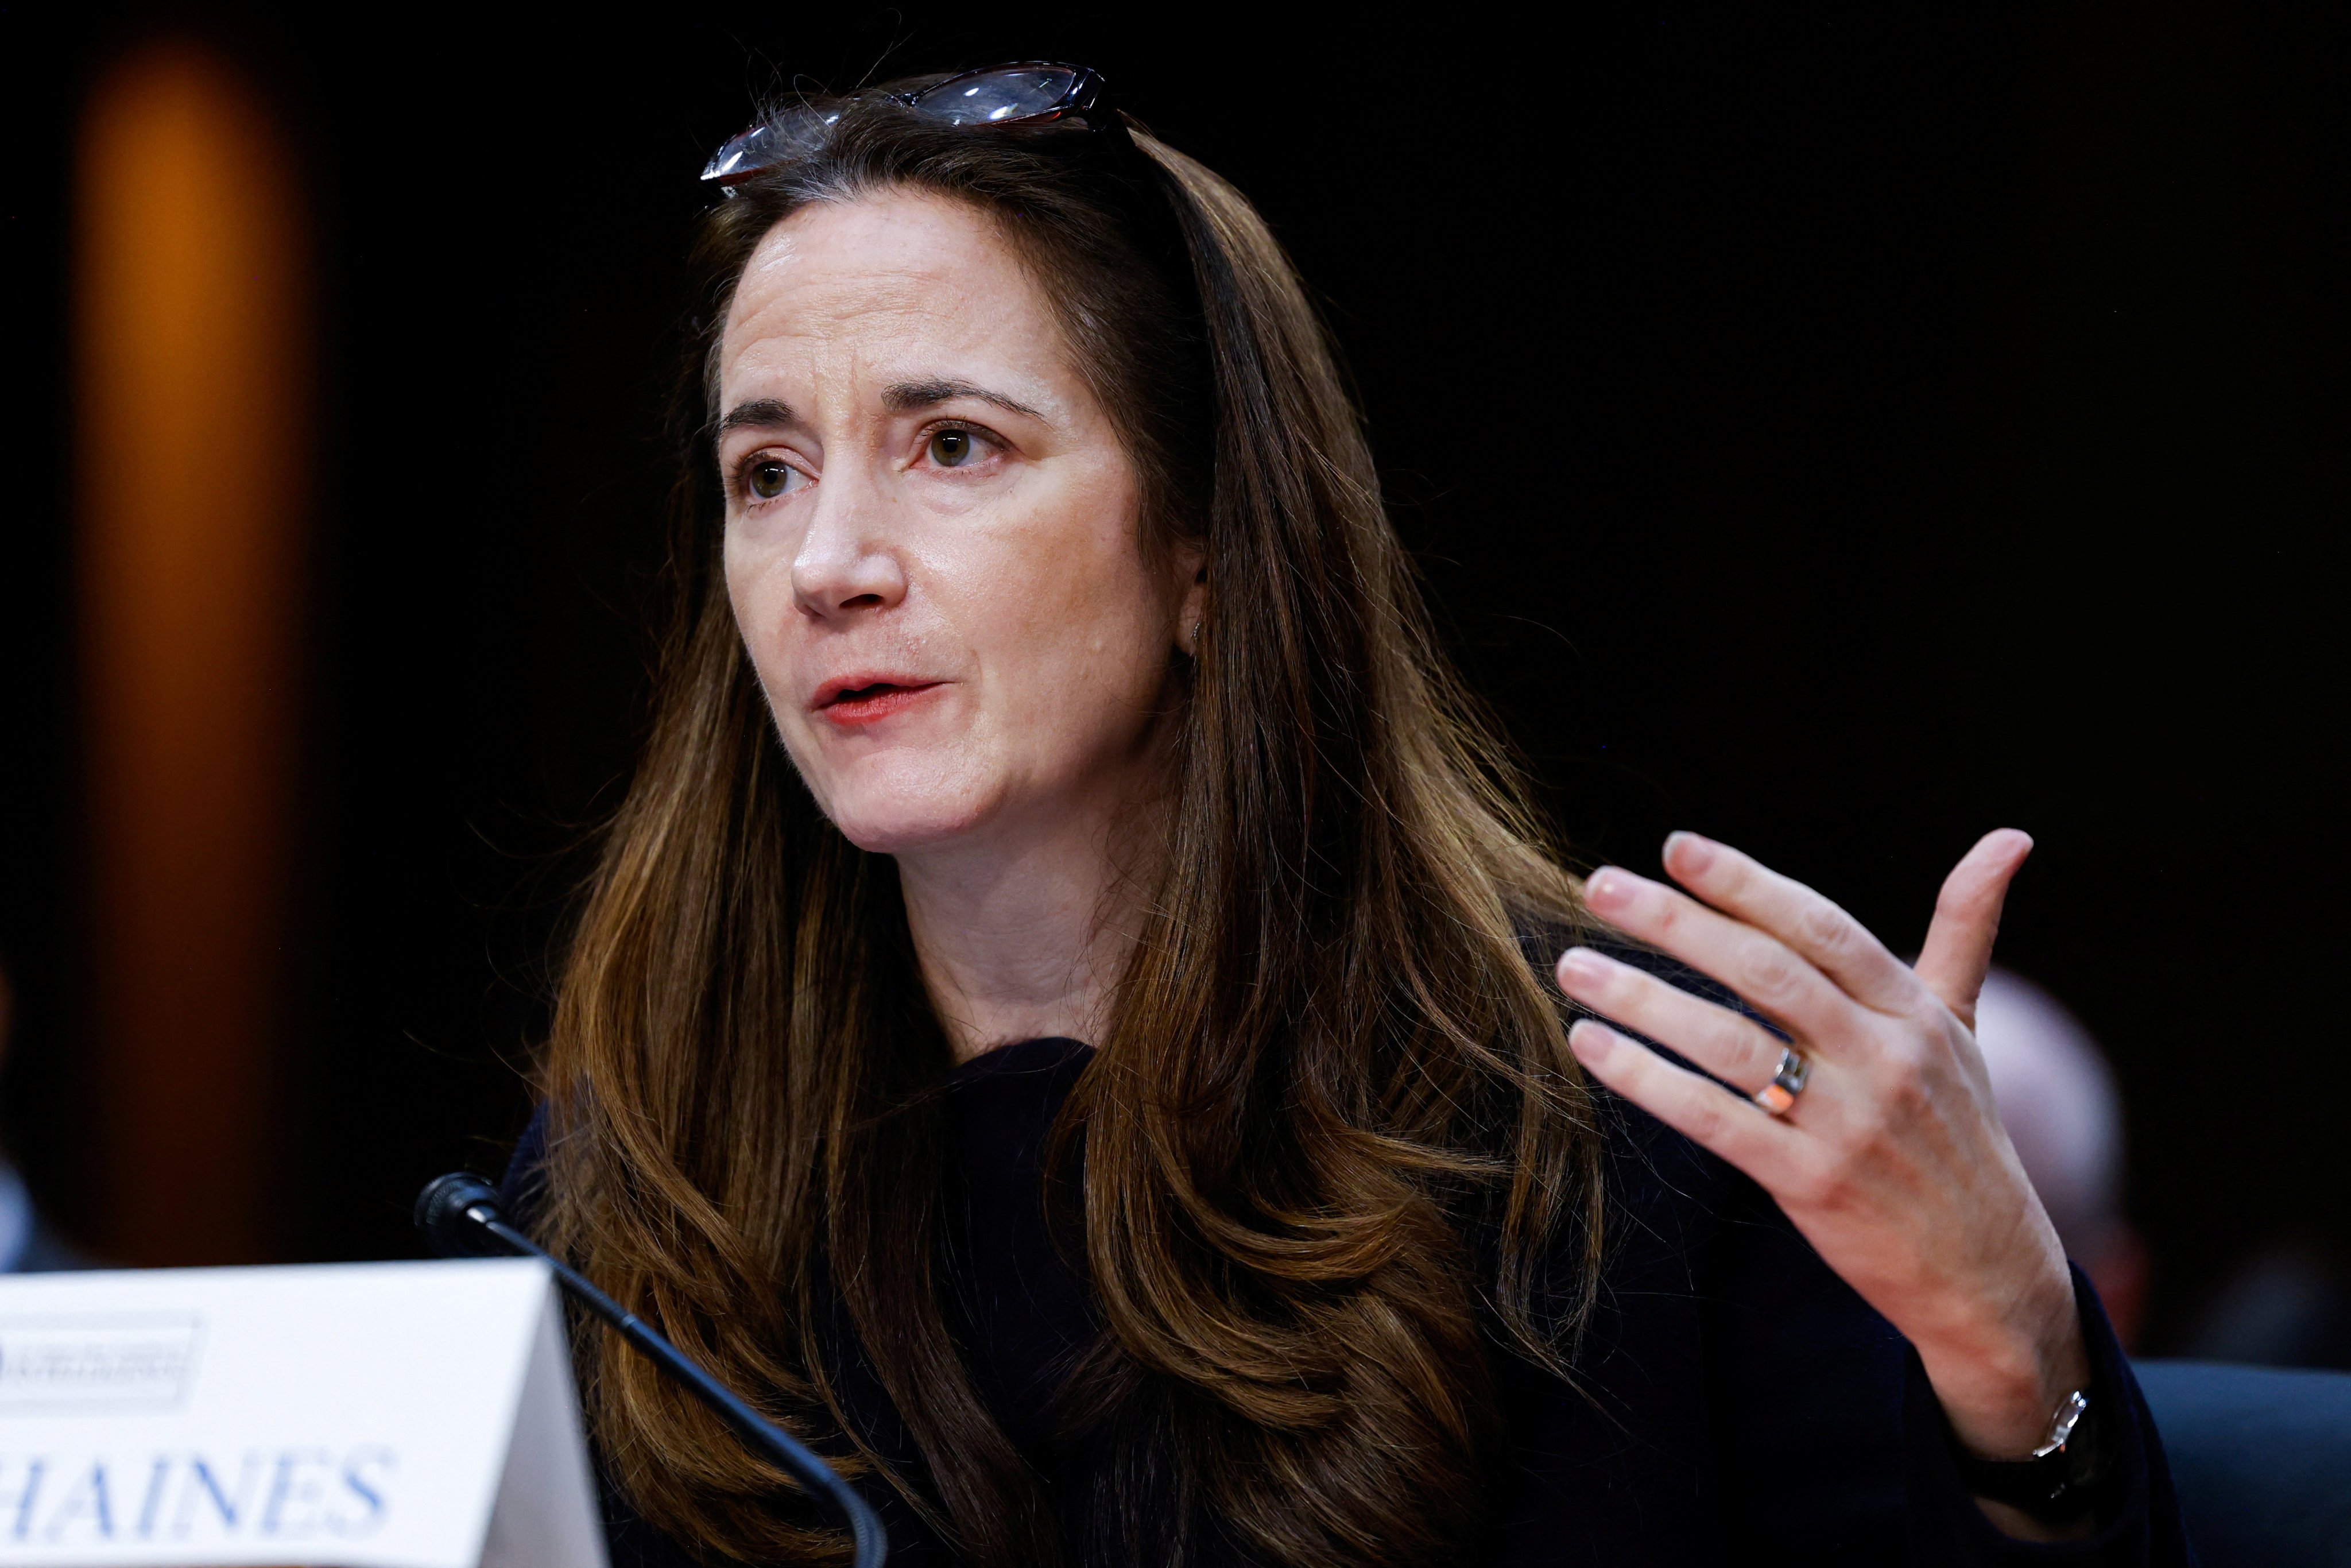 US Director of National Intelligence Avril Haines testifies on Tuesday at a Senate Intelligence Committee hearing on worldwide threats to American security. Photo: Reuters